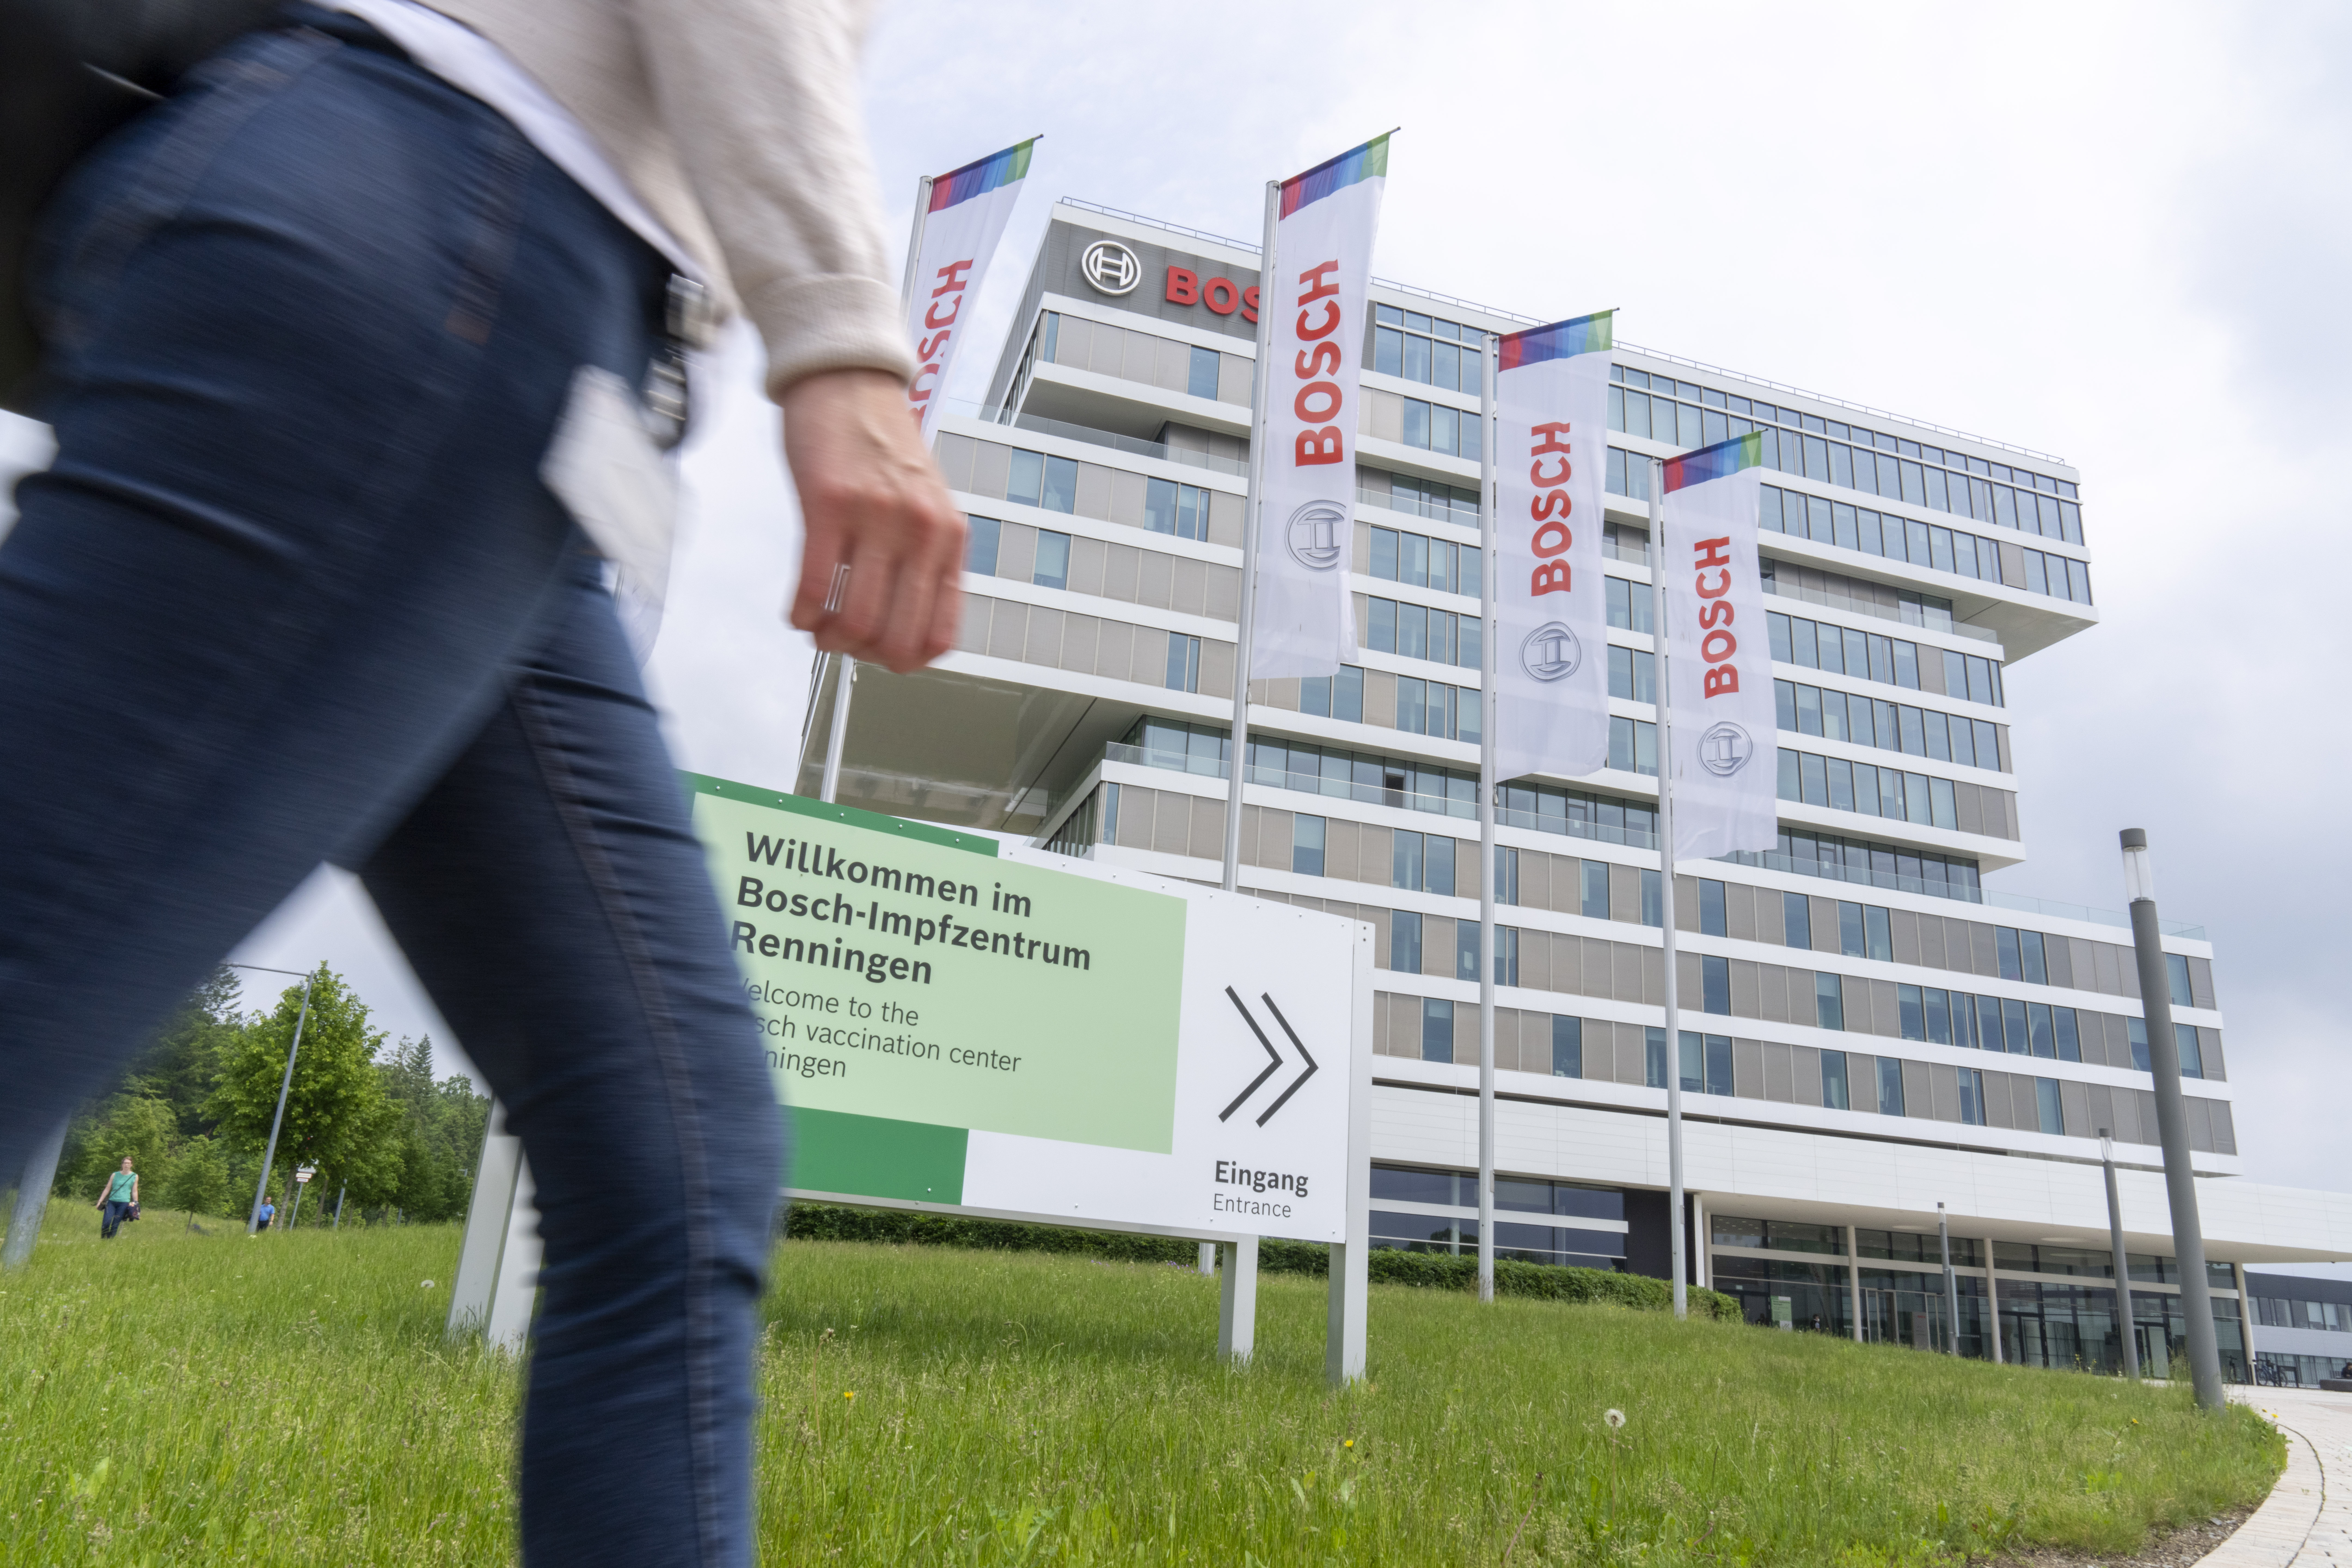 Bosch operates Covid-19 vaccination center on the grounds of its research campus